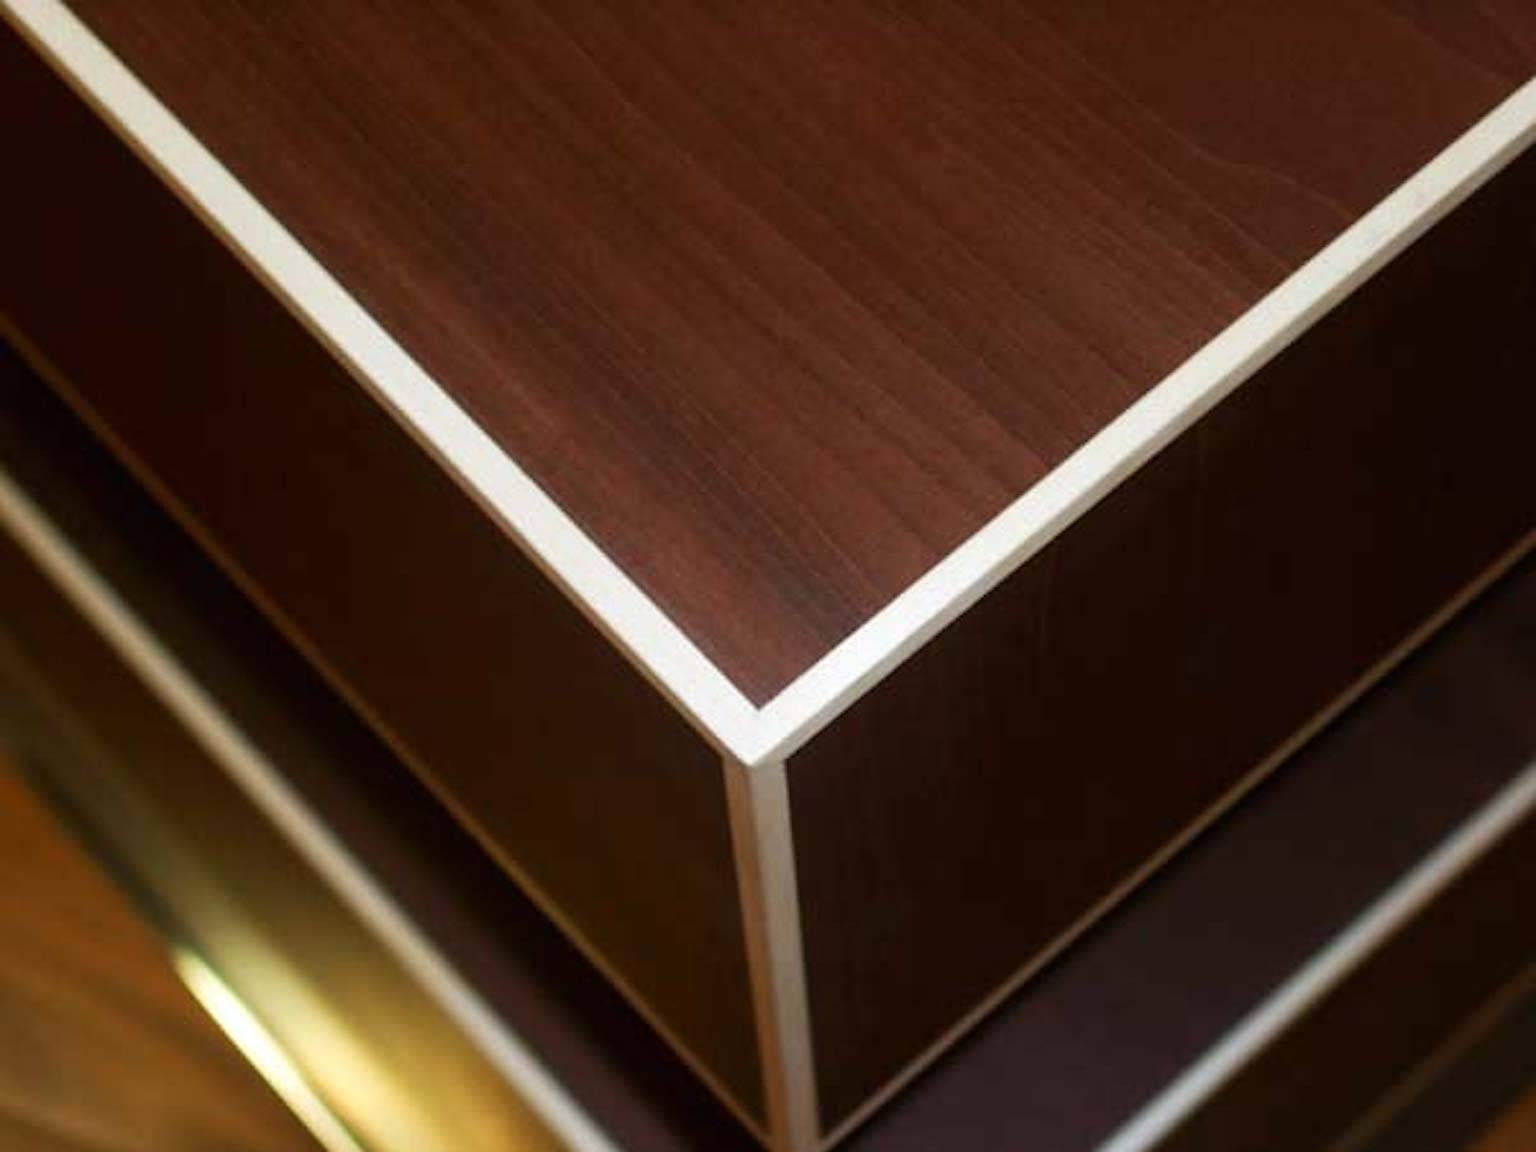 A table designed by Ettore Sottsass for Oak design edition in 2000 for the exhibition Italy - Japan. Rosewood veneer and chromium-plated steel side table. Producer's metallic plate. Limited edition of 20 copies. Out production.